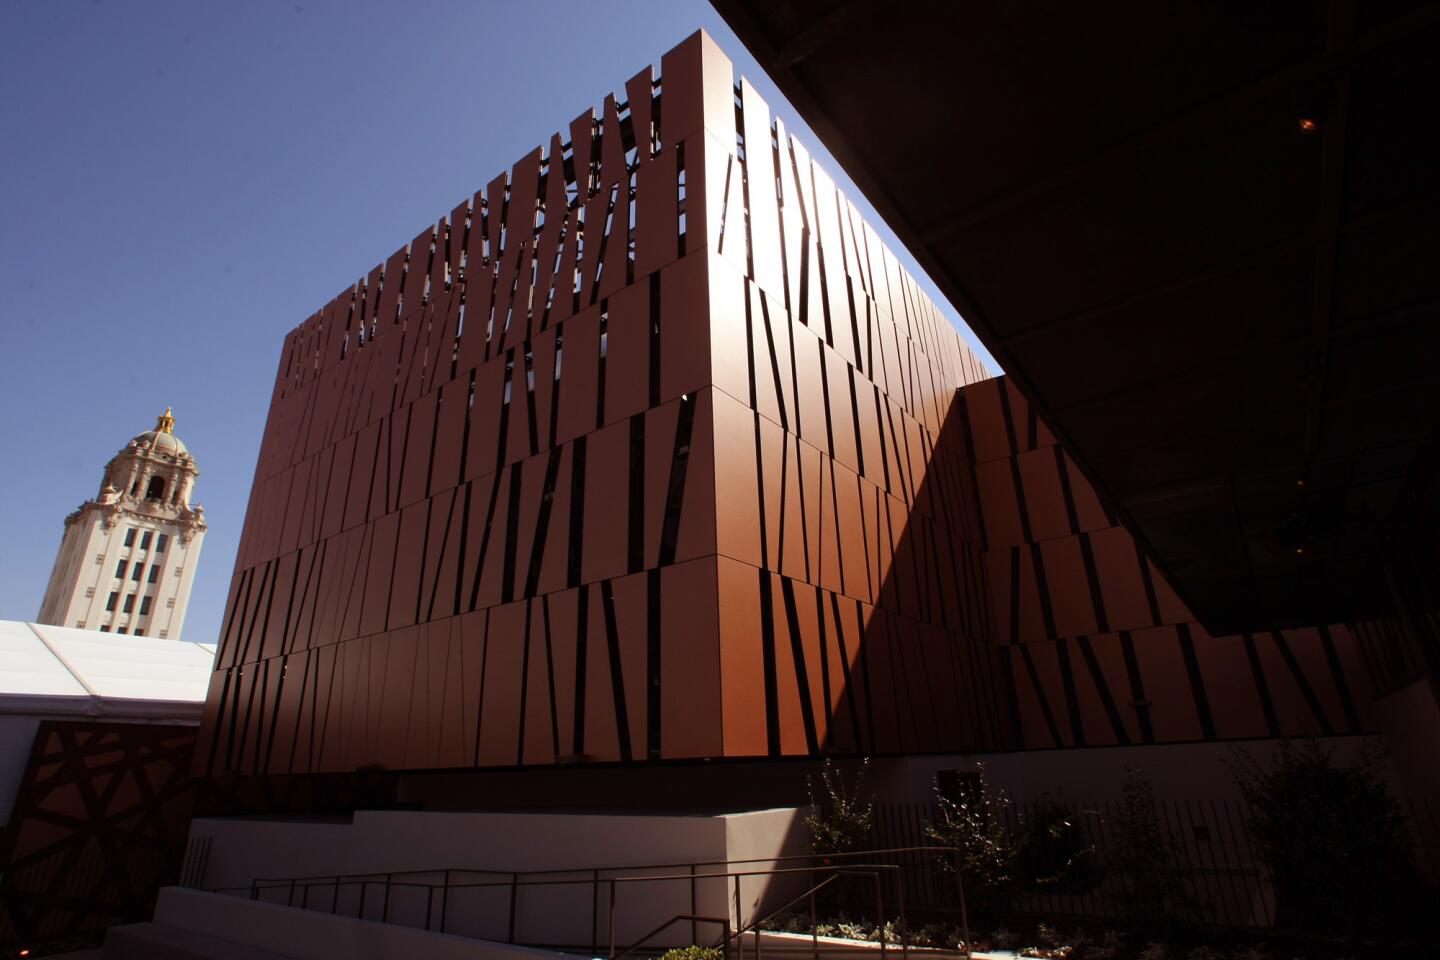 Wallis Annenberg Center For the Performing Arts